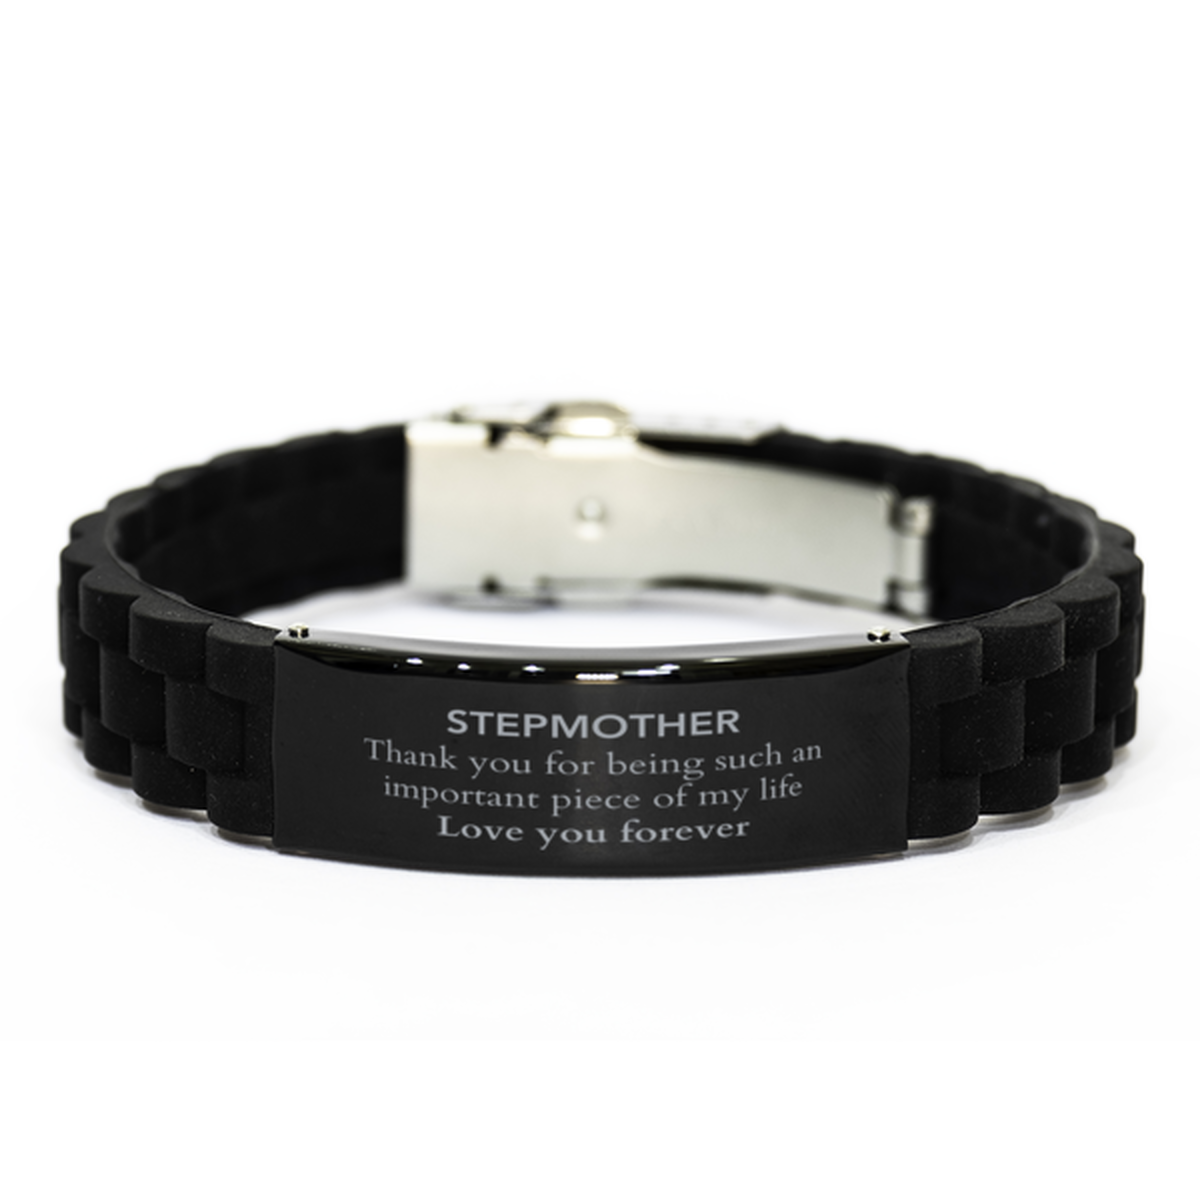 Appropriate Stepmother Black Glidelock Clasp Bracelet Epic Birthday Gifts for Stepmother Thank you for being such an important piece of my life Stepmother Christmas Mothers Fathers Day